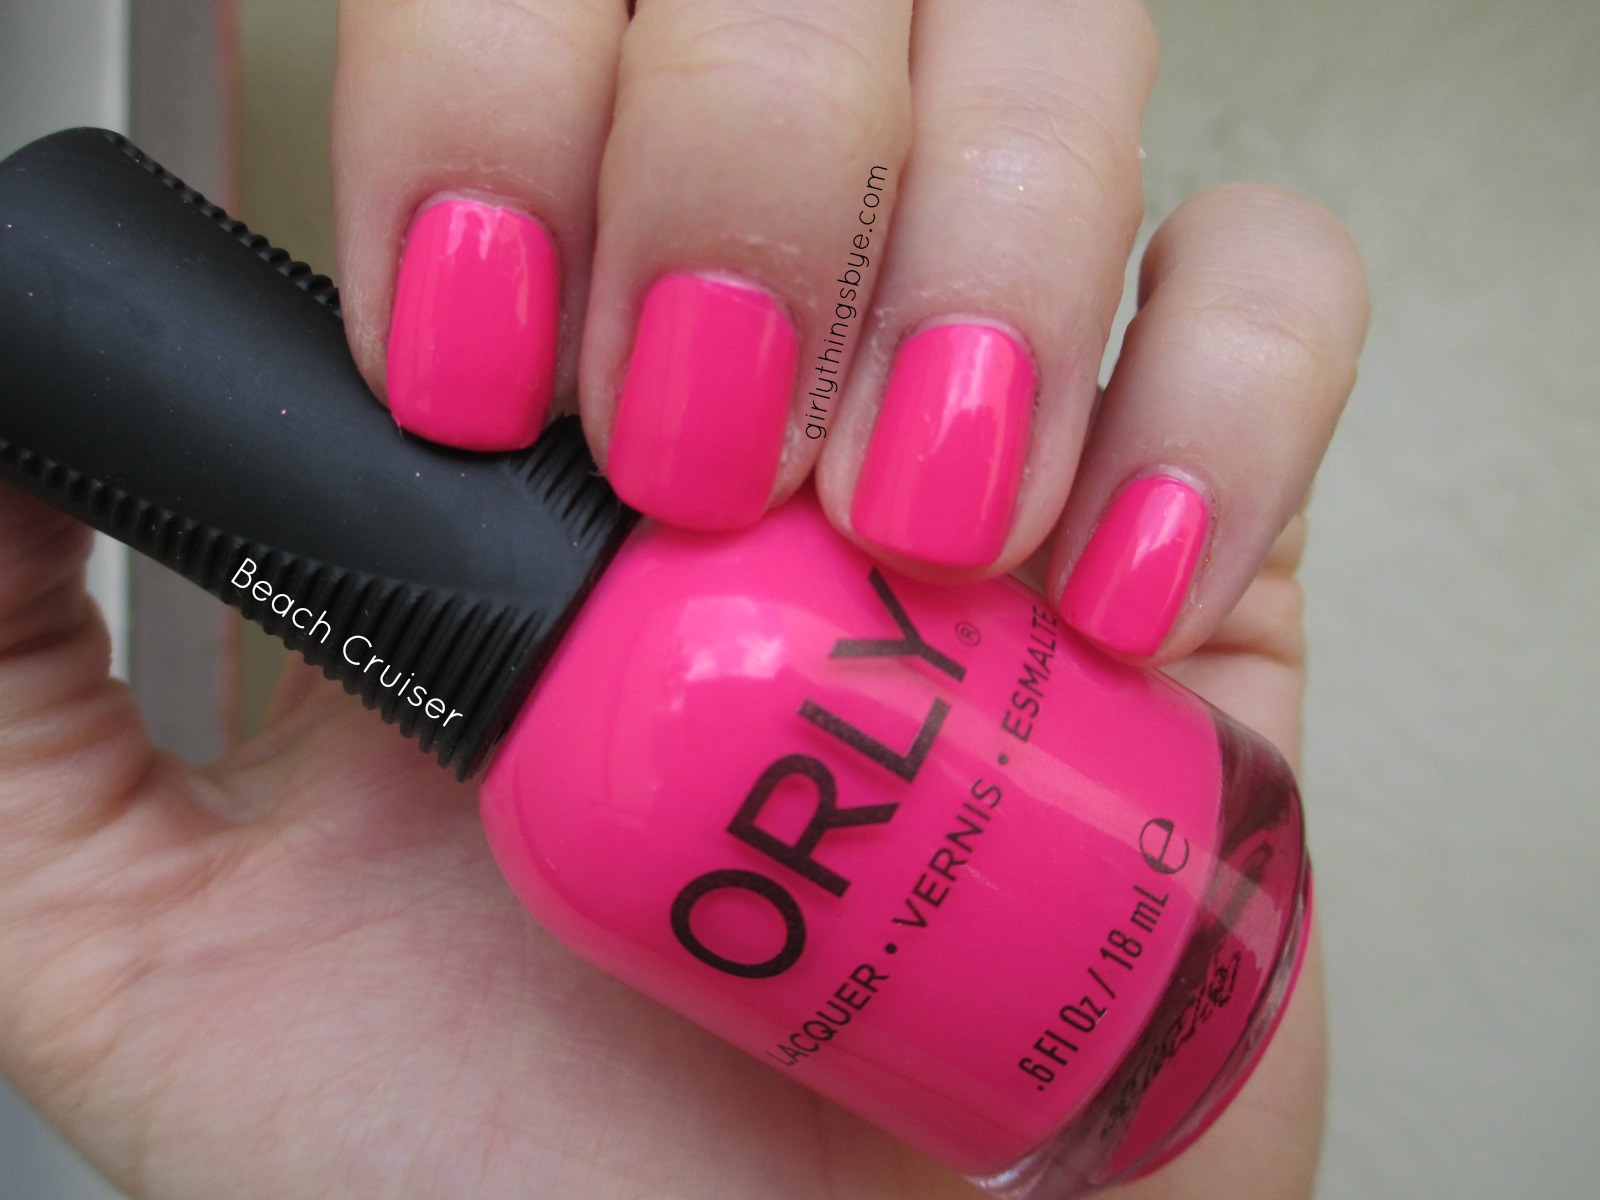 7. Orly Nail Lacquer in "Beach Cruiser" - wide 2